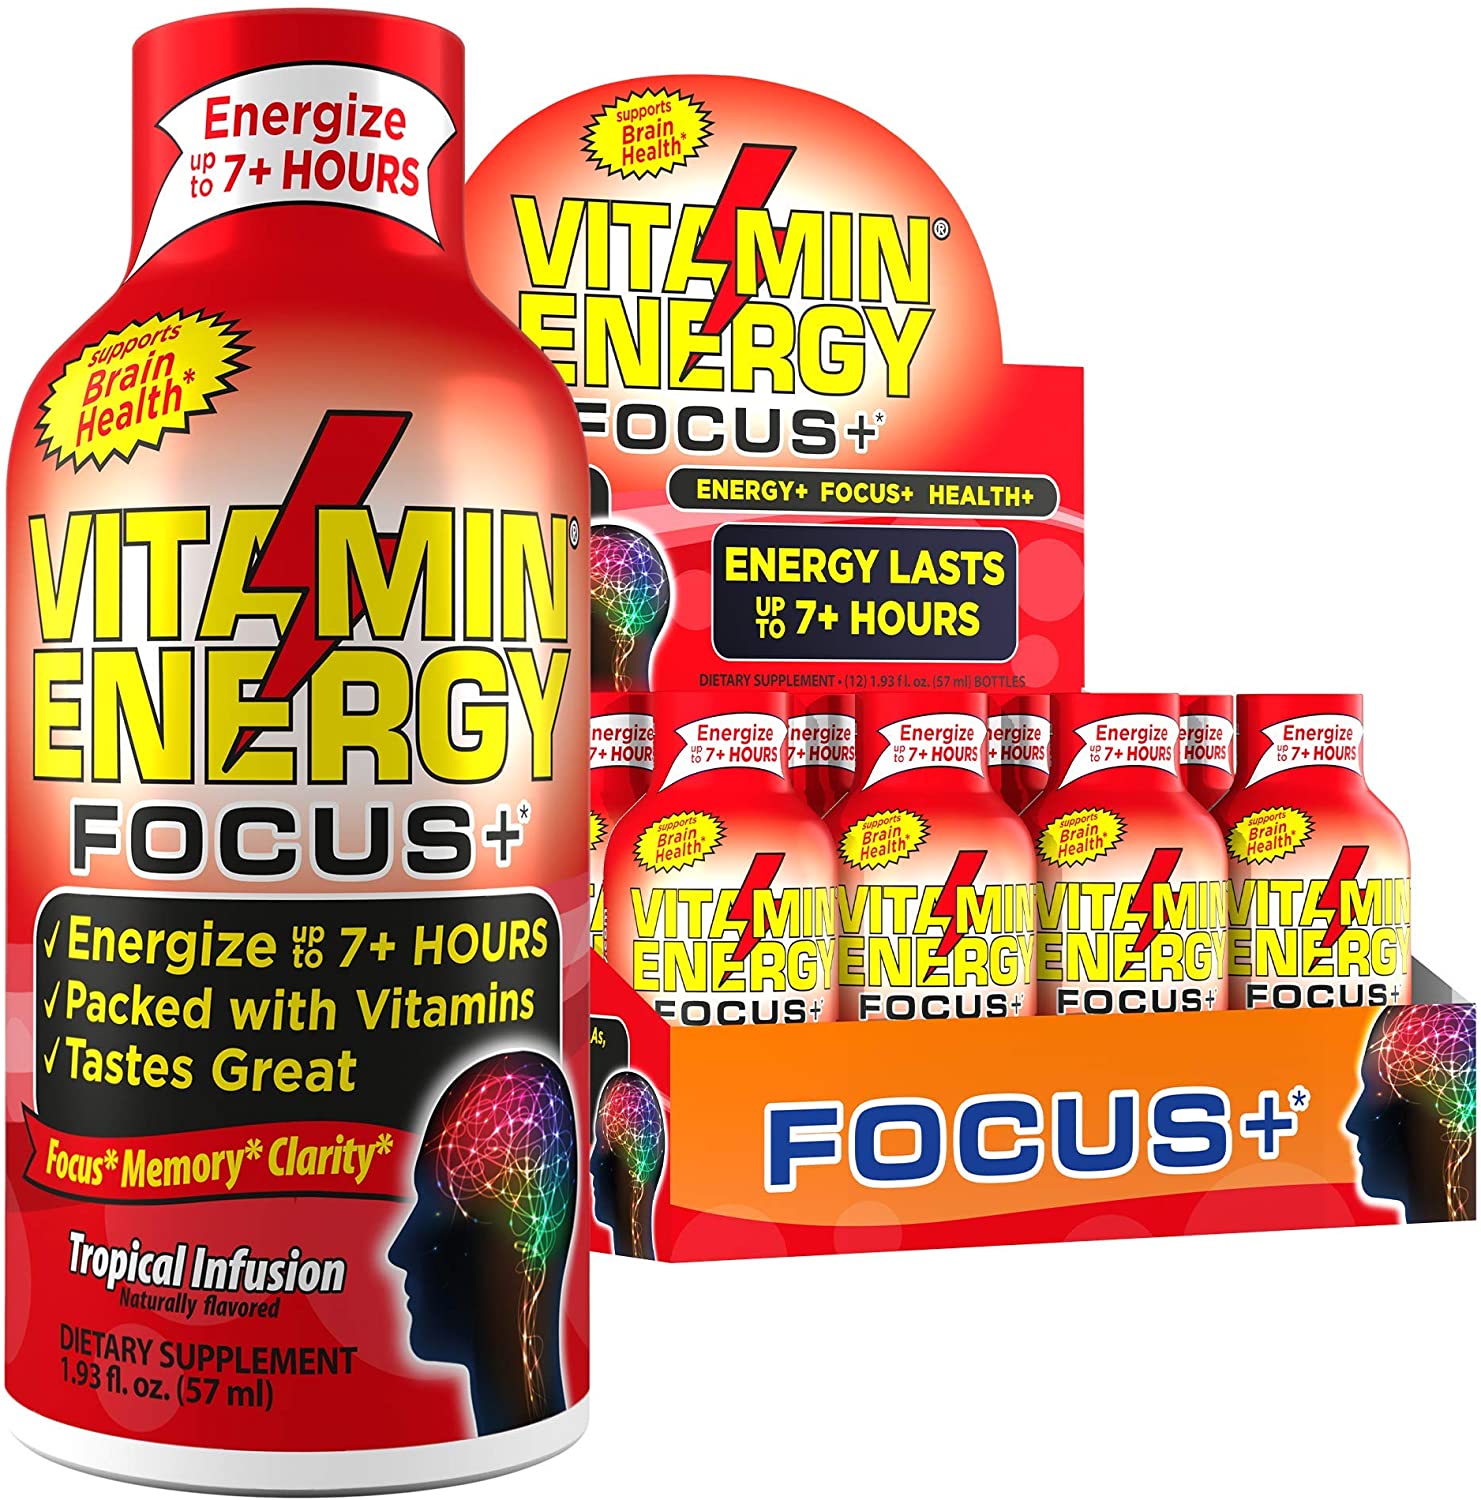 Vitamin Energy, LLC, Wednesday, October 13, 2021, Press release picture